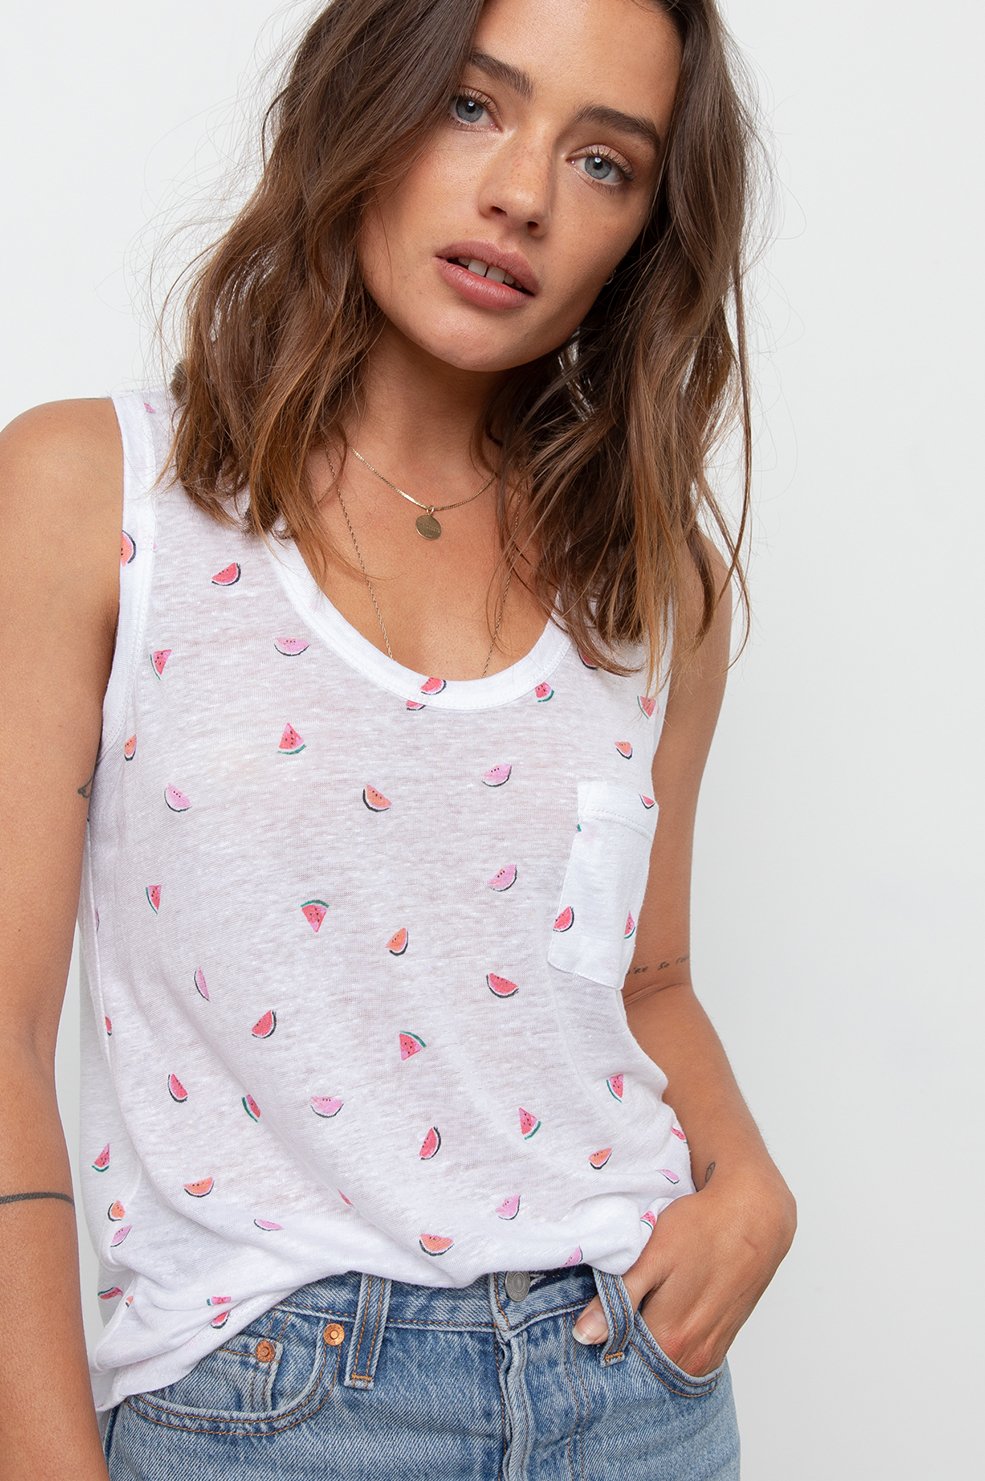 RAILS - Quinn Tank Top in White with Watermelons